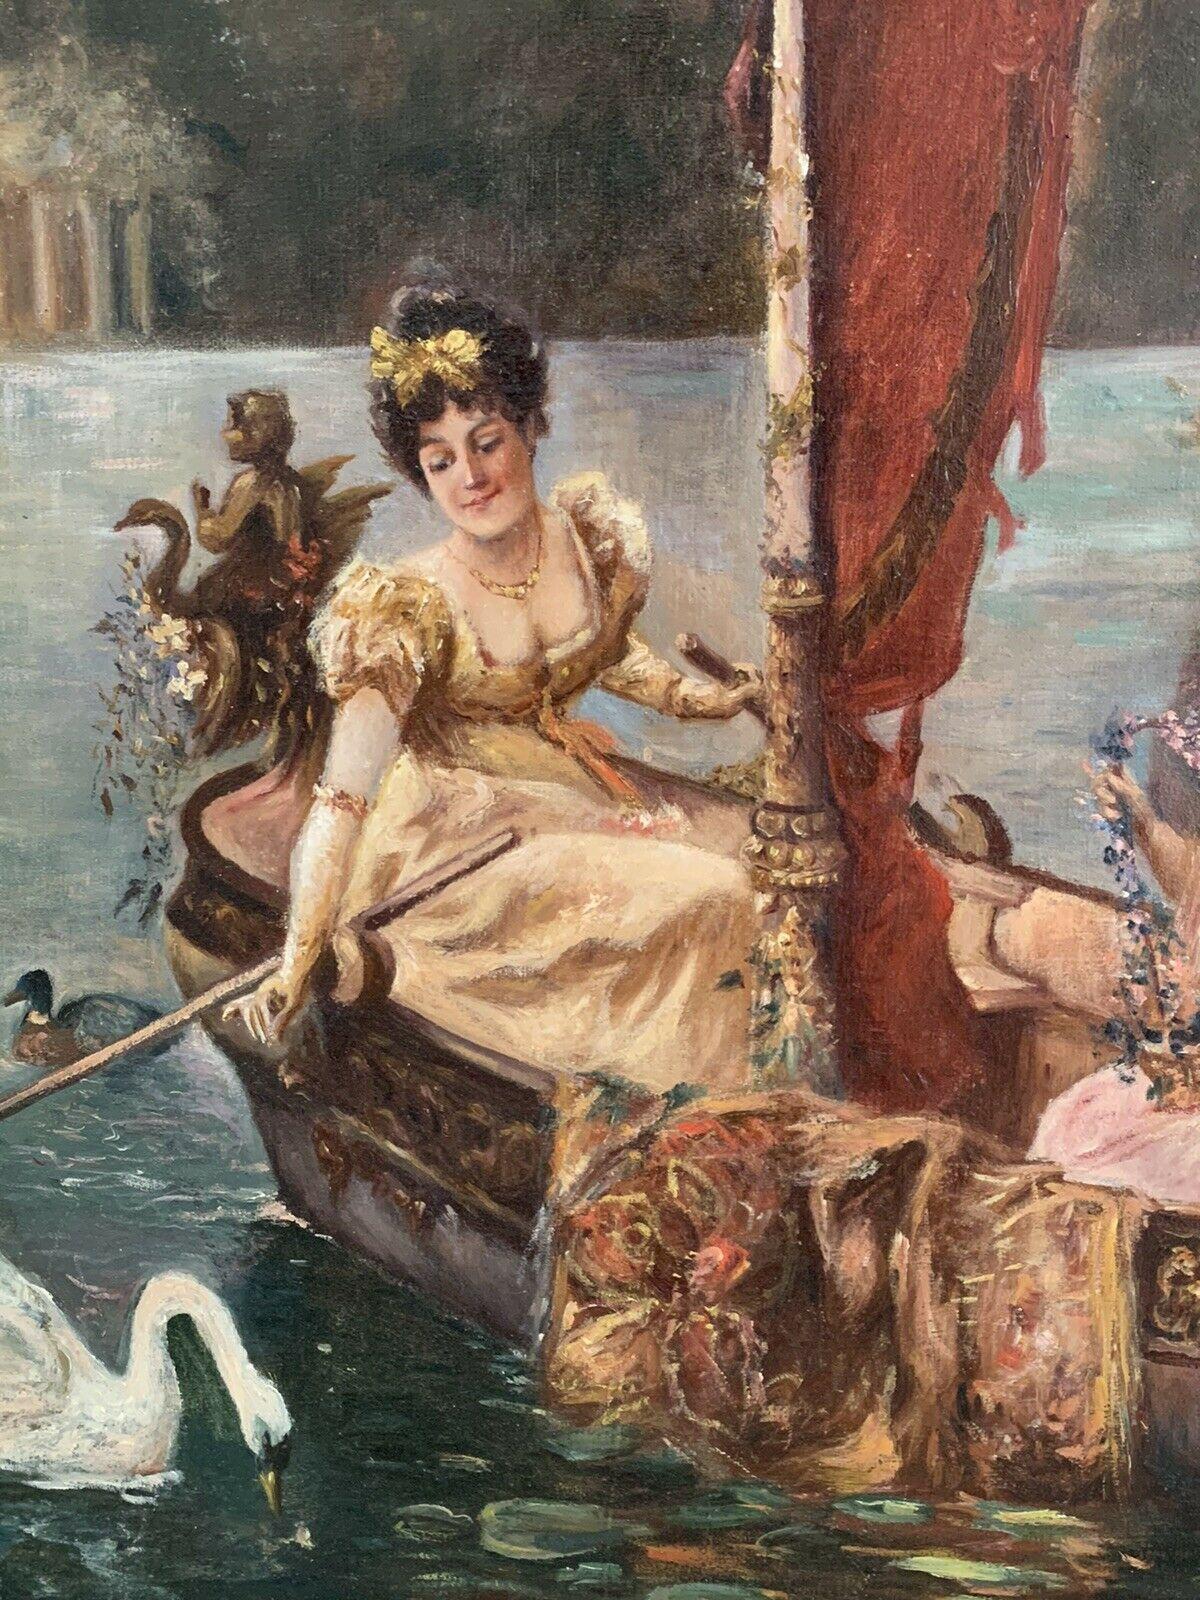 C. 1900 FRENCH BELLE EPOQUE HUGE OIL PAINTING - ELEGANT LADIES BOATING ON LAKE - Black Portrait Painting by Unknown